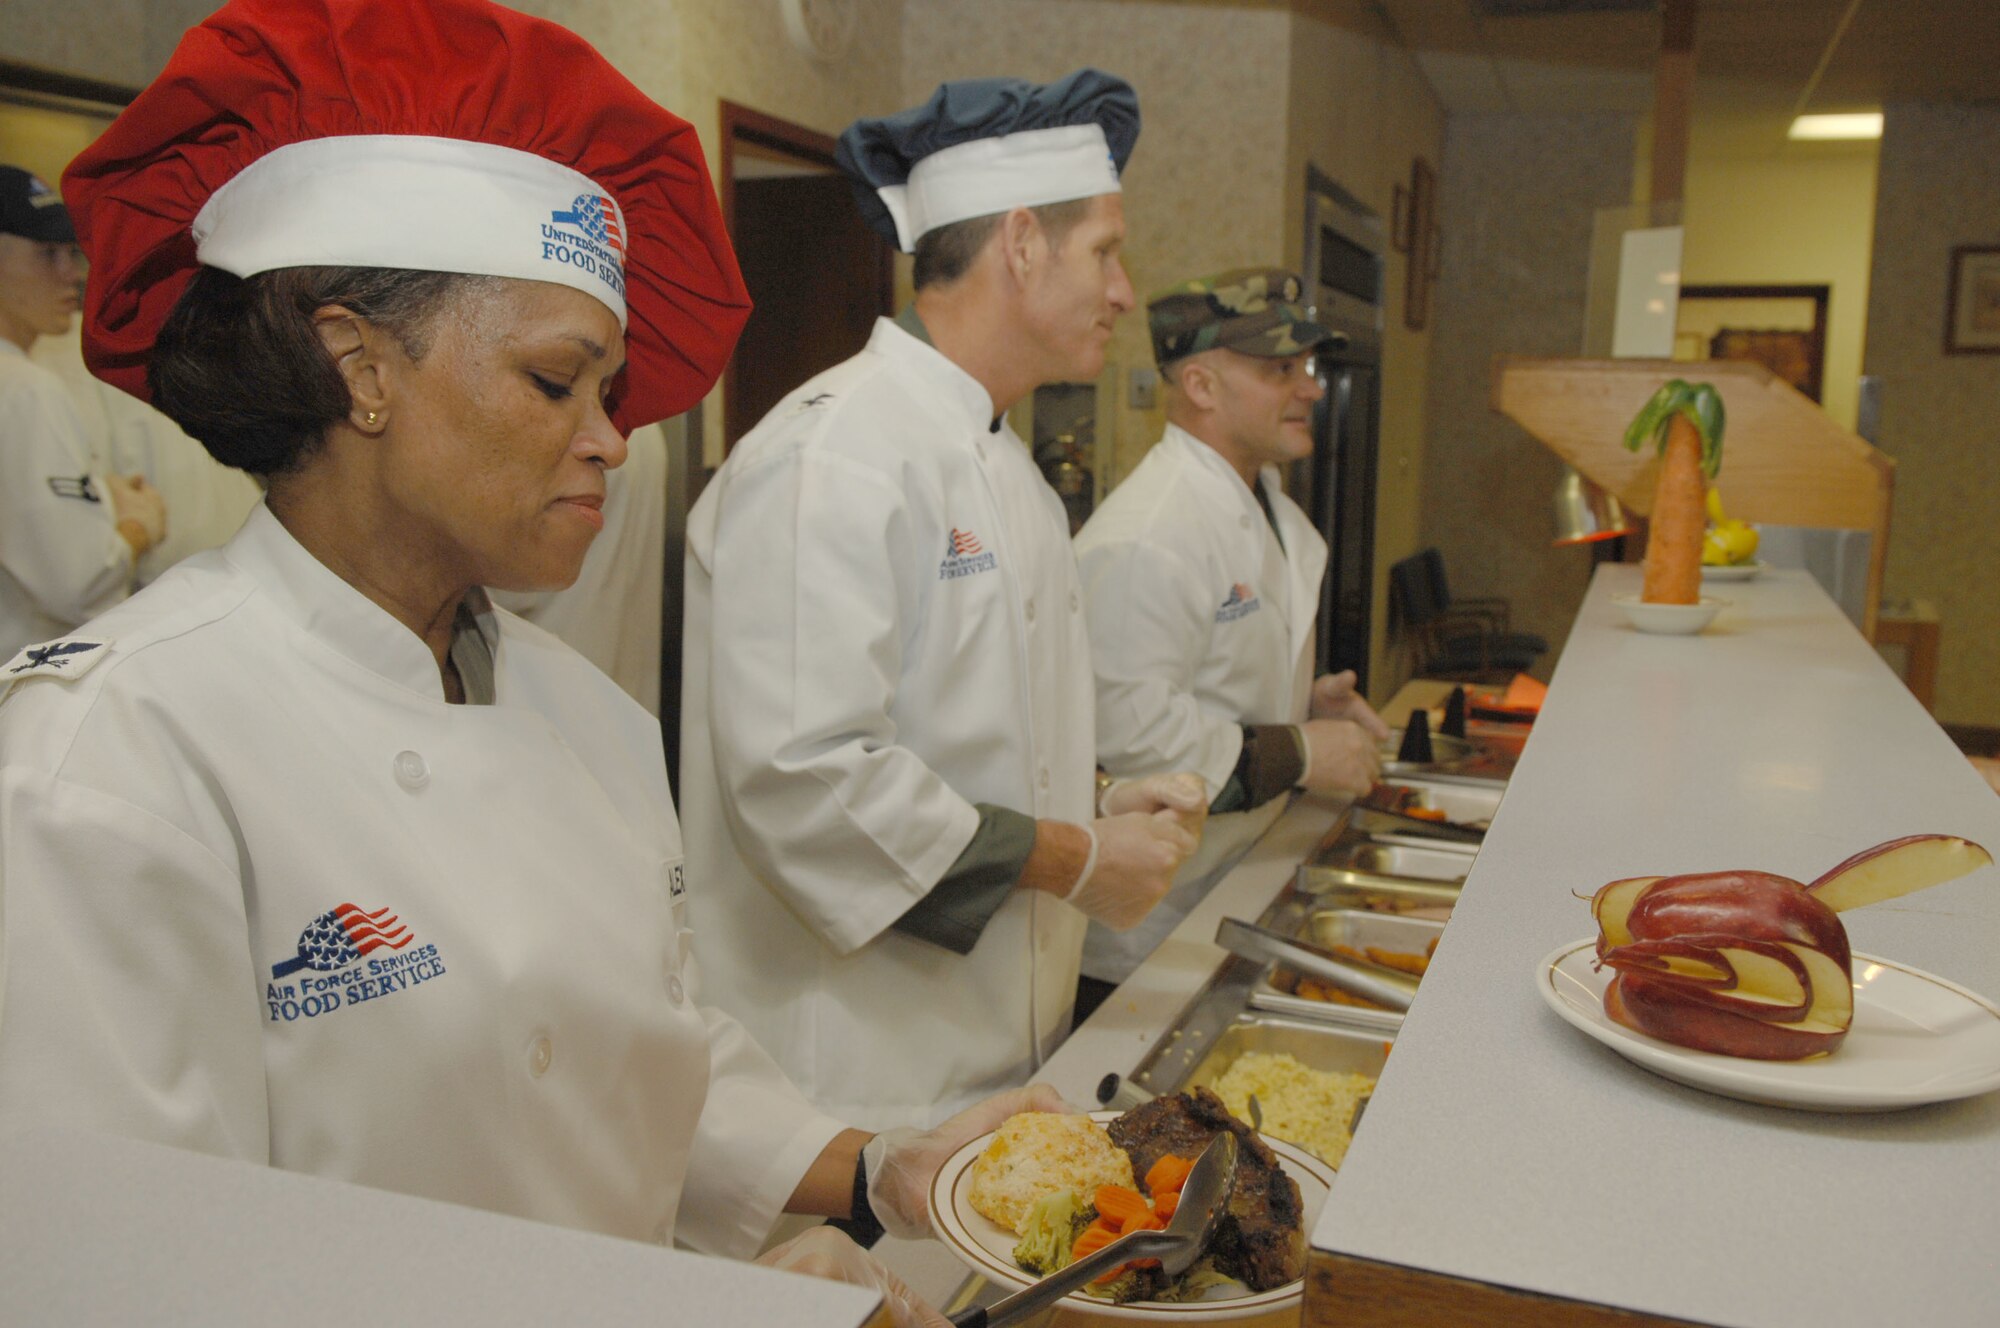 (Left to right)Colonel Renita Alexander, 28th Mission Support Group commander; Col. Peter Castor, 28th Bomb Wing vice commander; and Lt. Col. Stephen Mamakos, 28th Civil Engineer Squadron individual mobilization augmentee; serve gourmet cuisine at the Bandit Inn Dining Facility March 11. This recreated Airmen Appreciation Meal was an opportunity for base leadership to thank the Ellsworth Airmen for their service and hard work. (U.S. Air Force photo/Airman 1st Class Joshua Seybert)